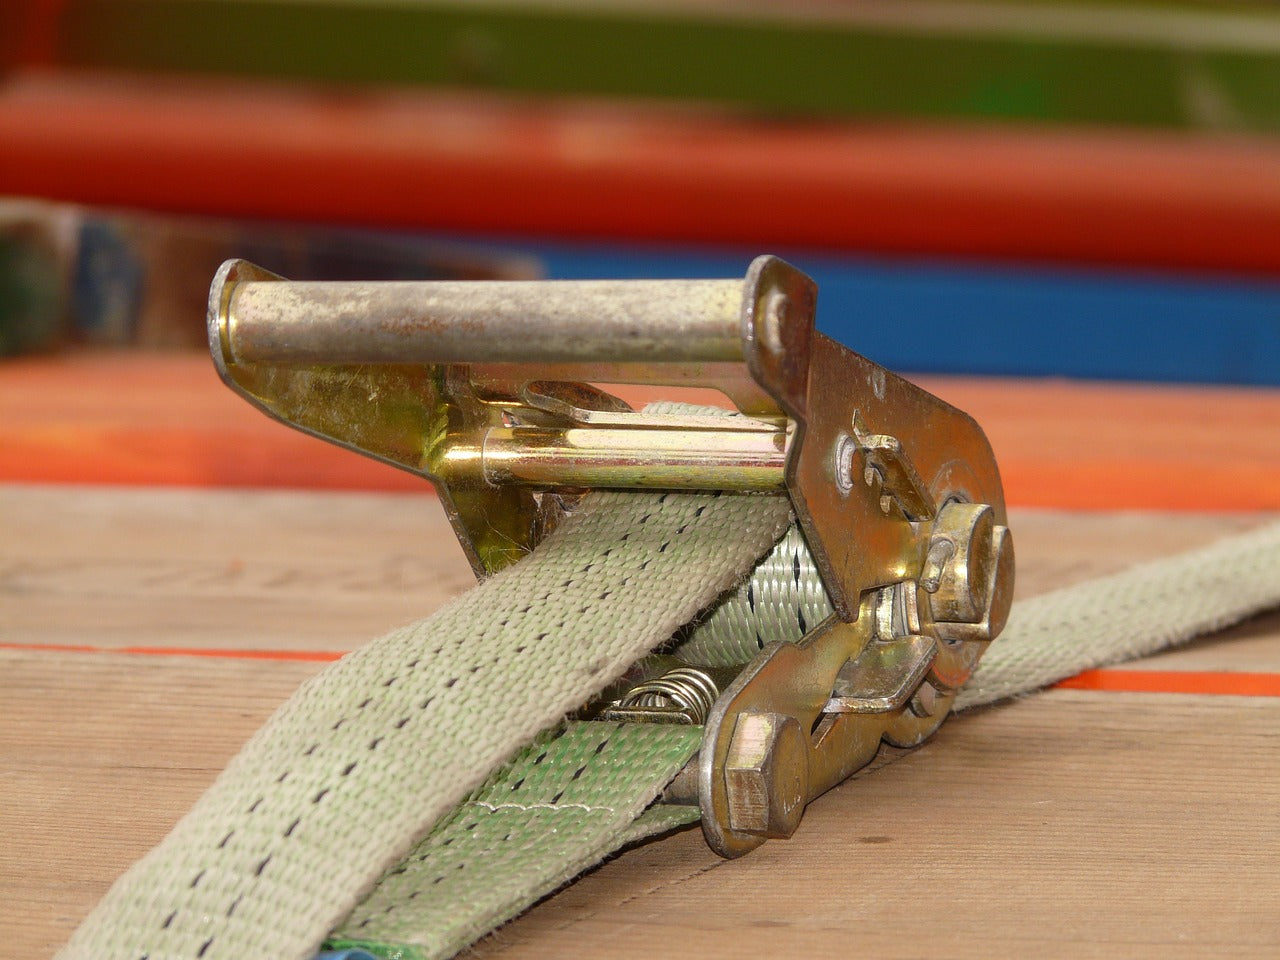 What Can Cause Ratchet Straps to Come Loose? Common Mistakes Explained